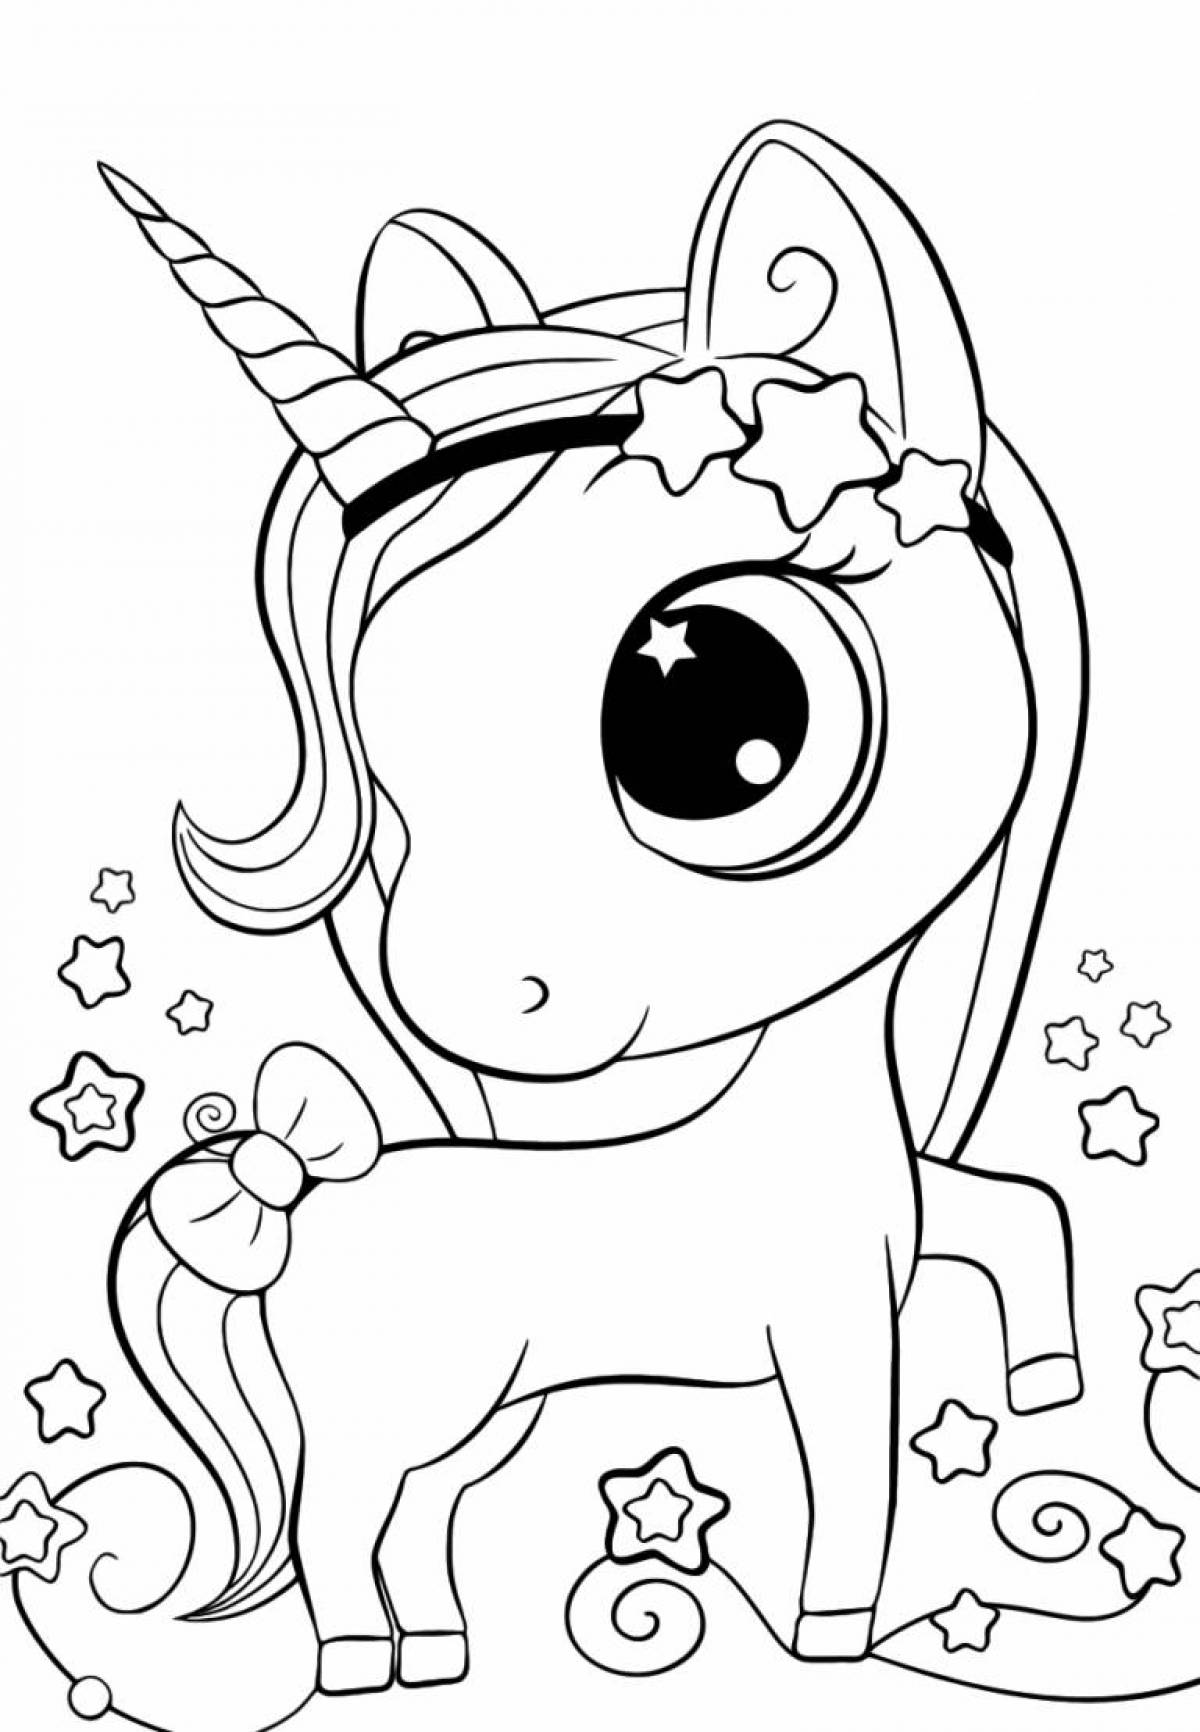 Adorable unicorn coloring book for girls